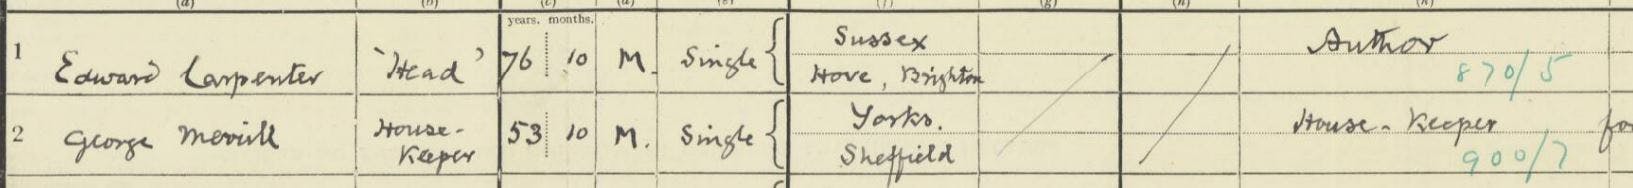 Edward and George in the 1921 Census.